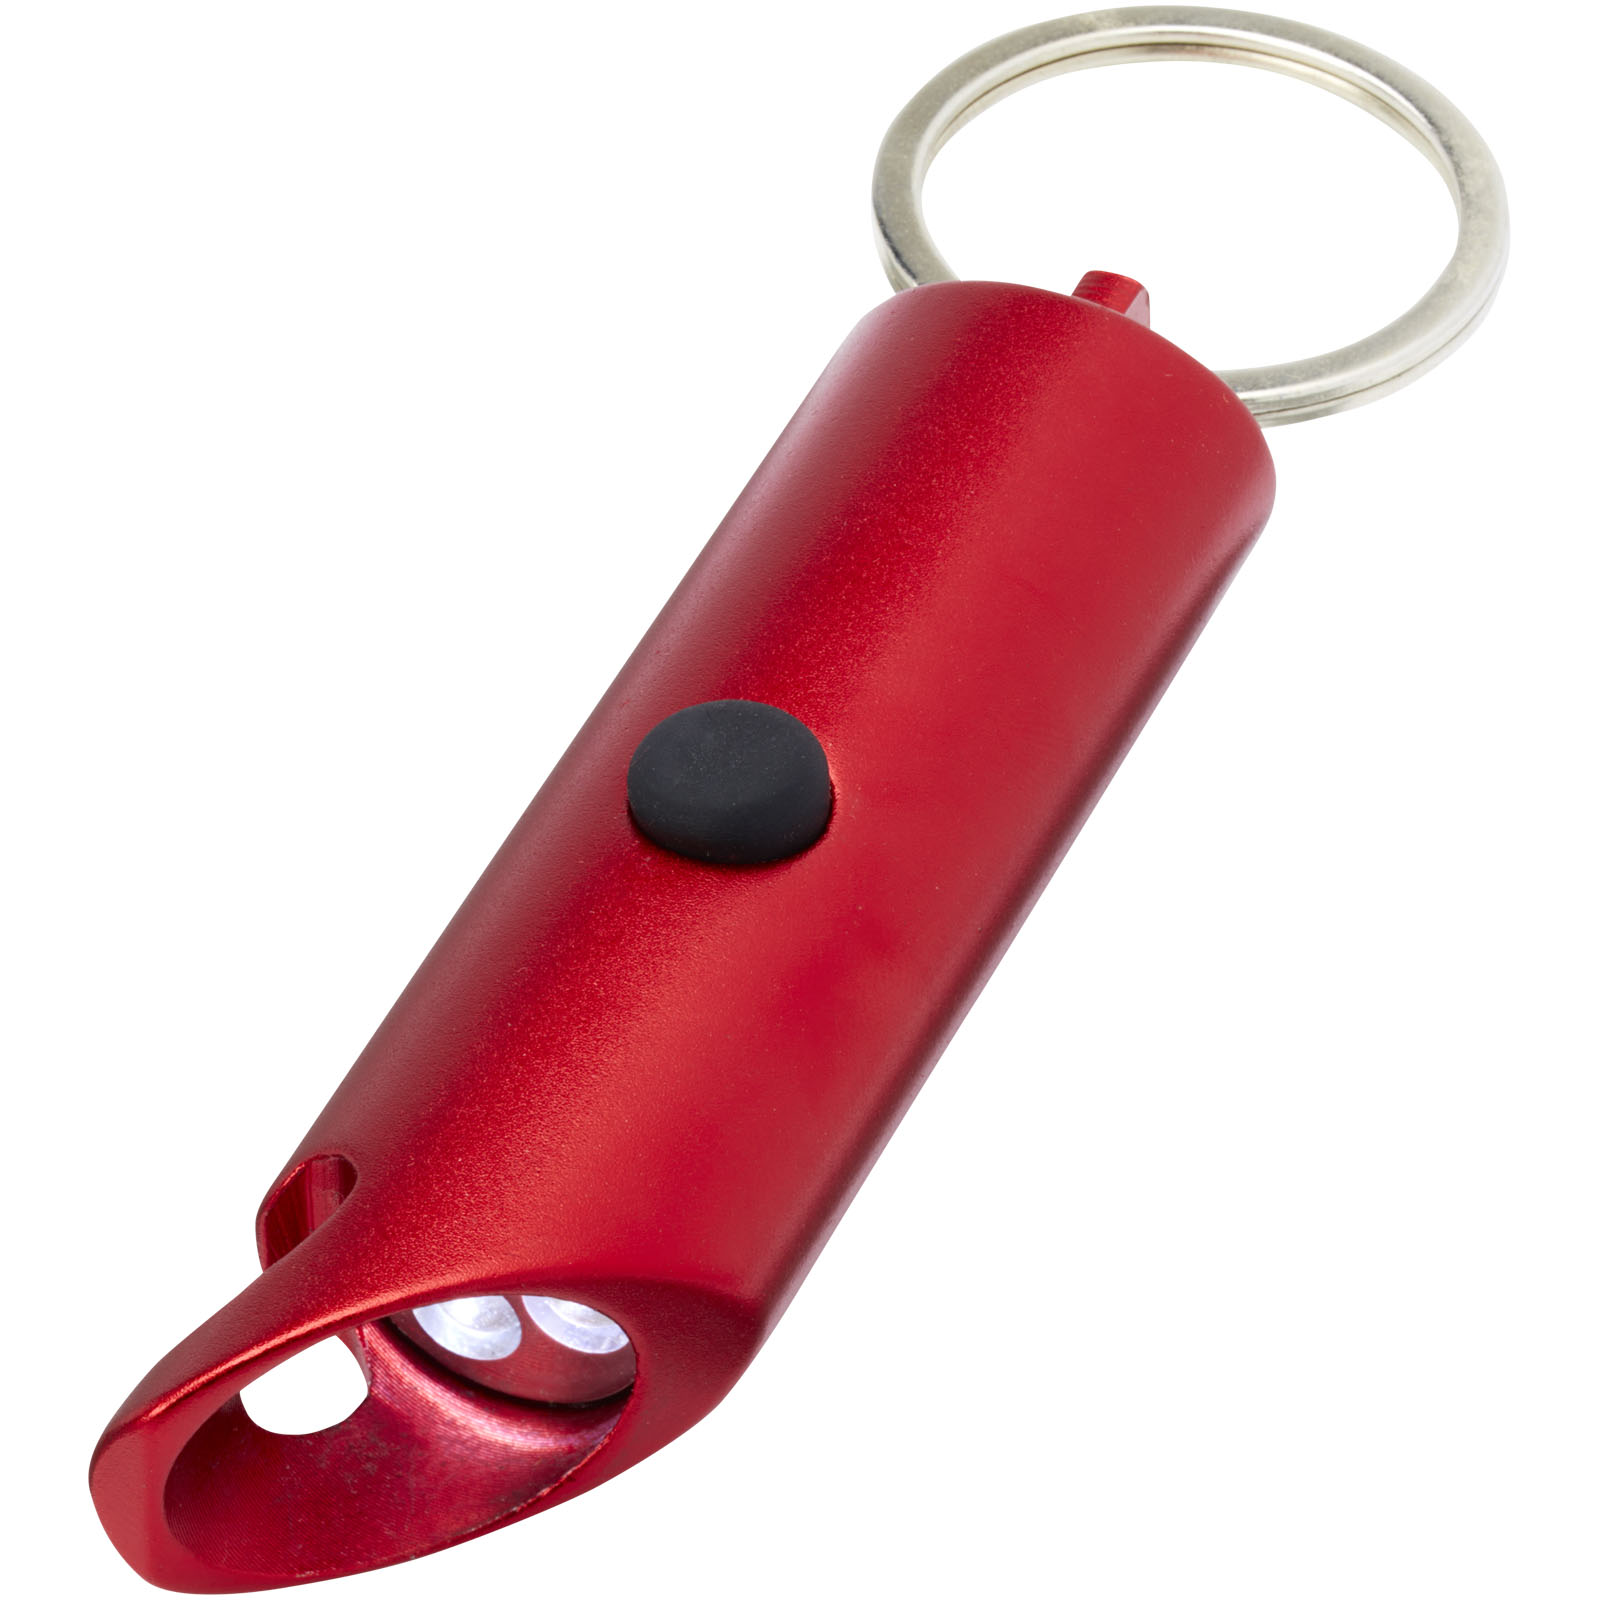 Advertising Lamps - Flare RCS recycled aluminium IPX LED light and bottle opener with keychain